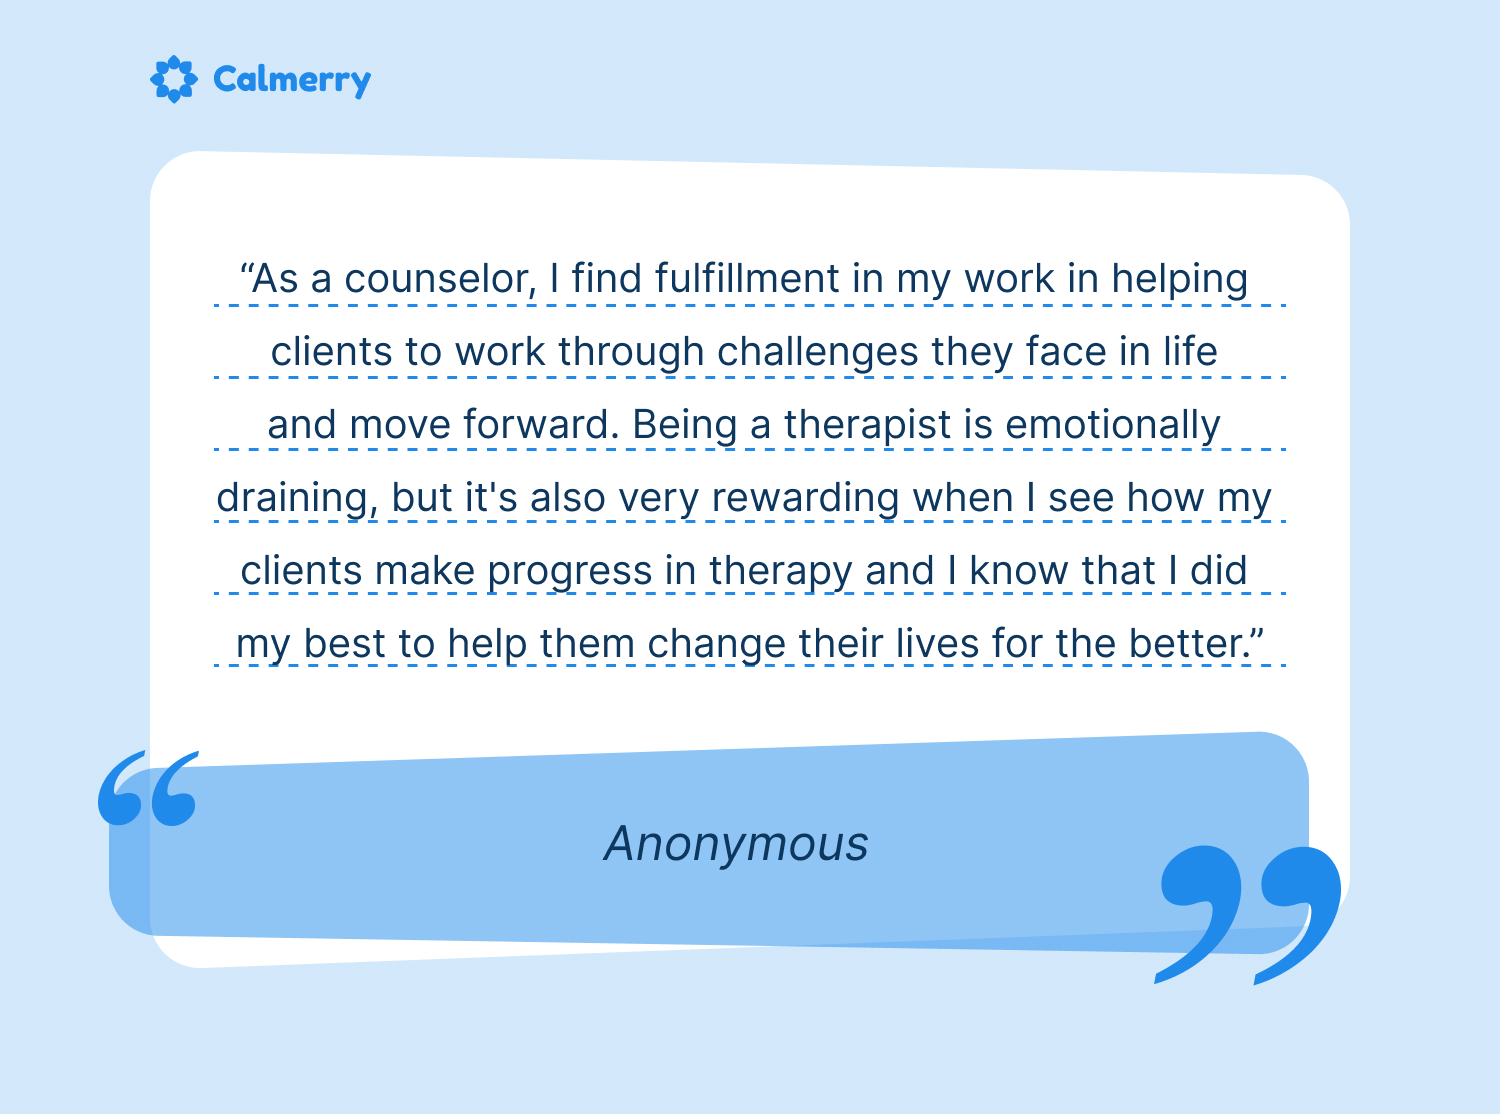 Calmerry therapist quote: "As a counselor, I find fulfillment in my work in helping clients to work through challenges they face in life and move forward."